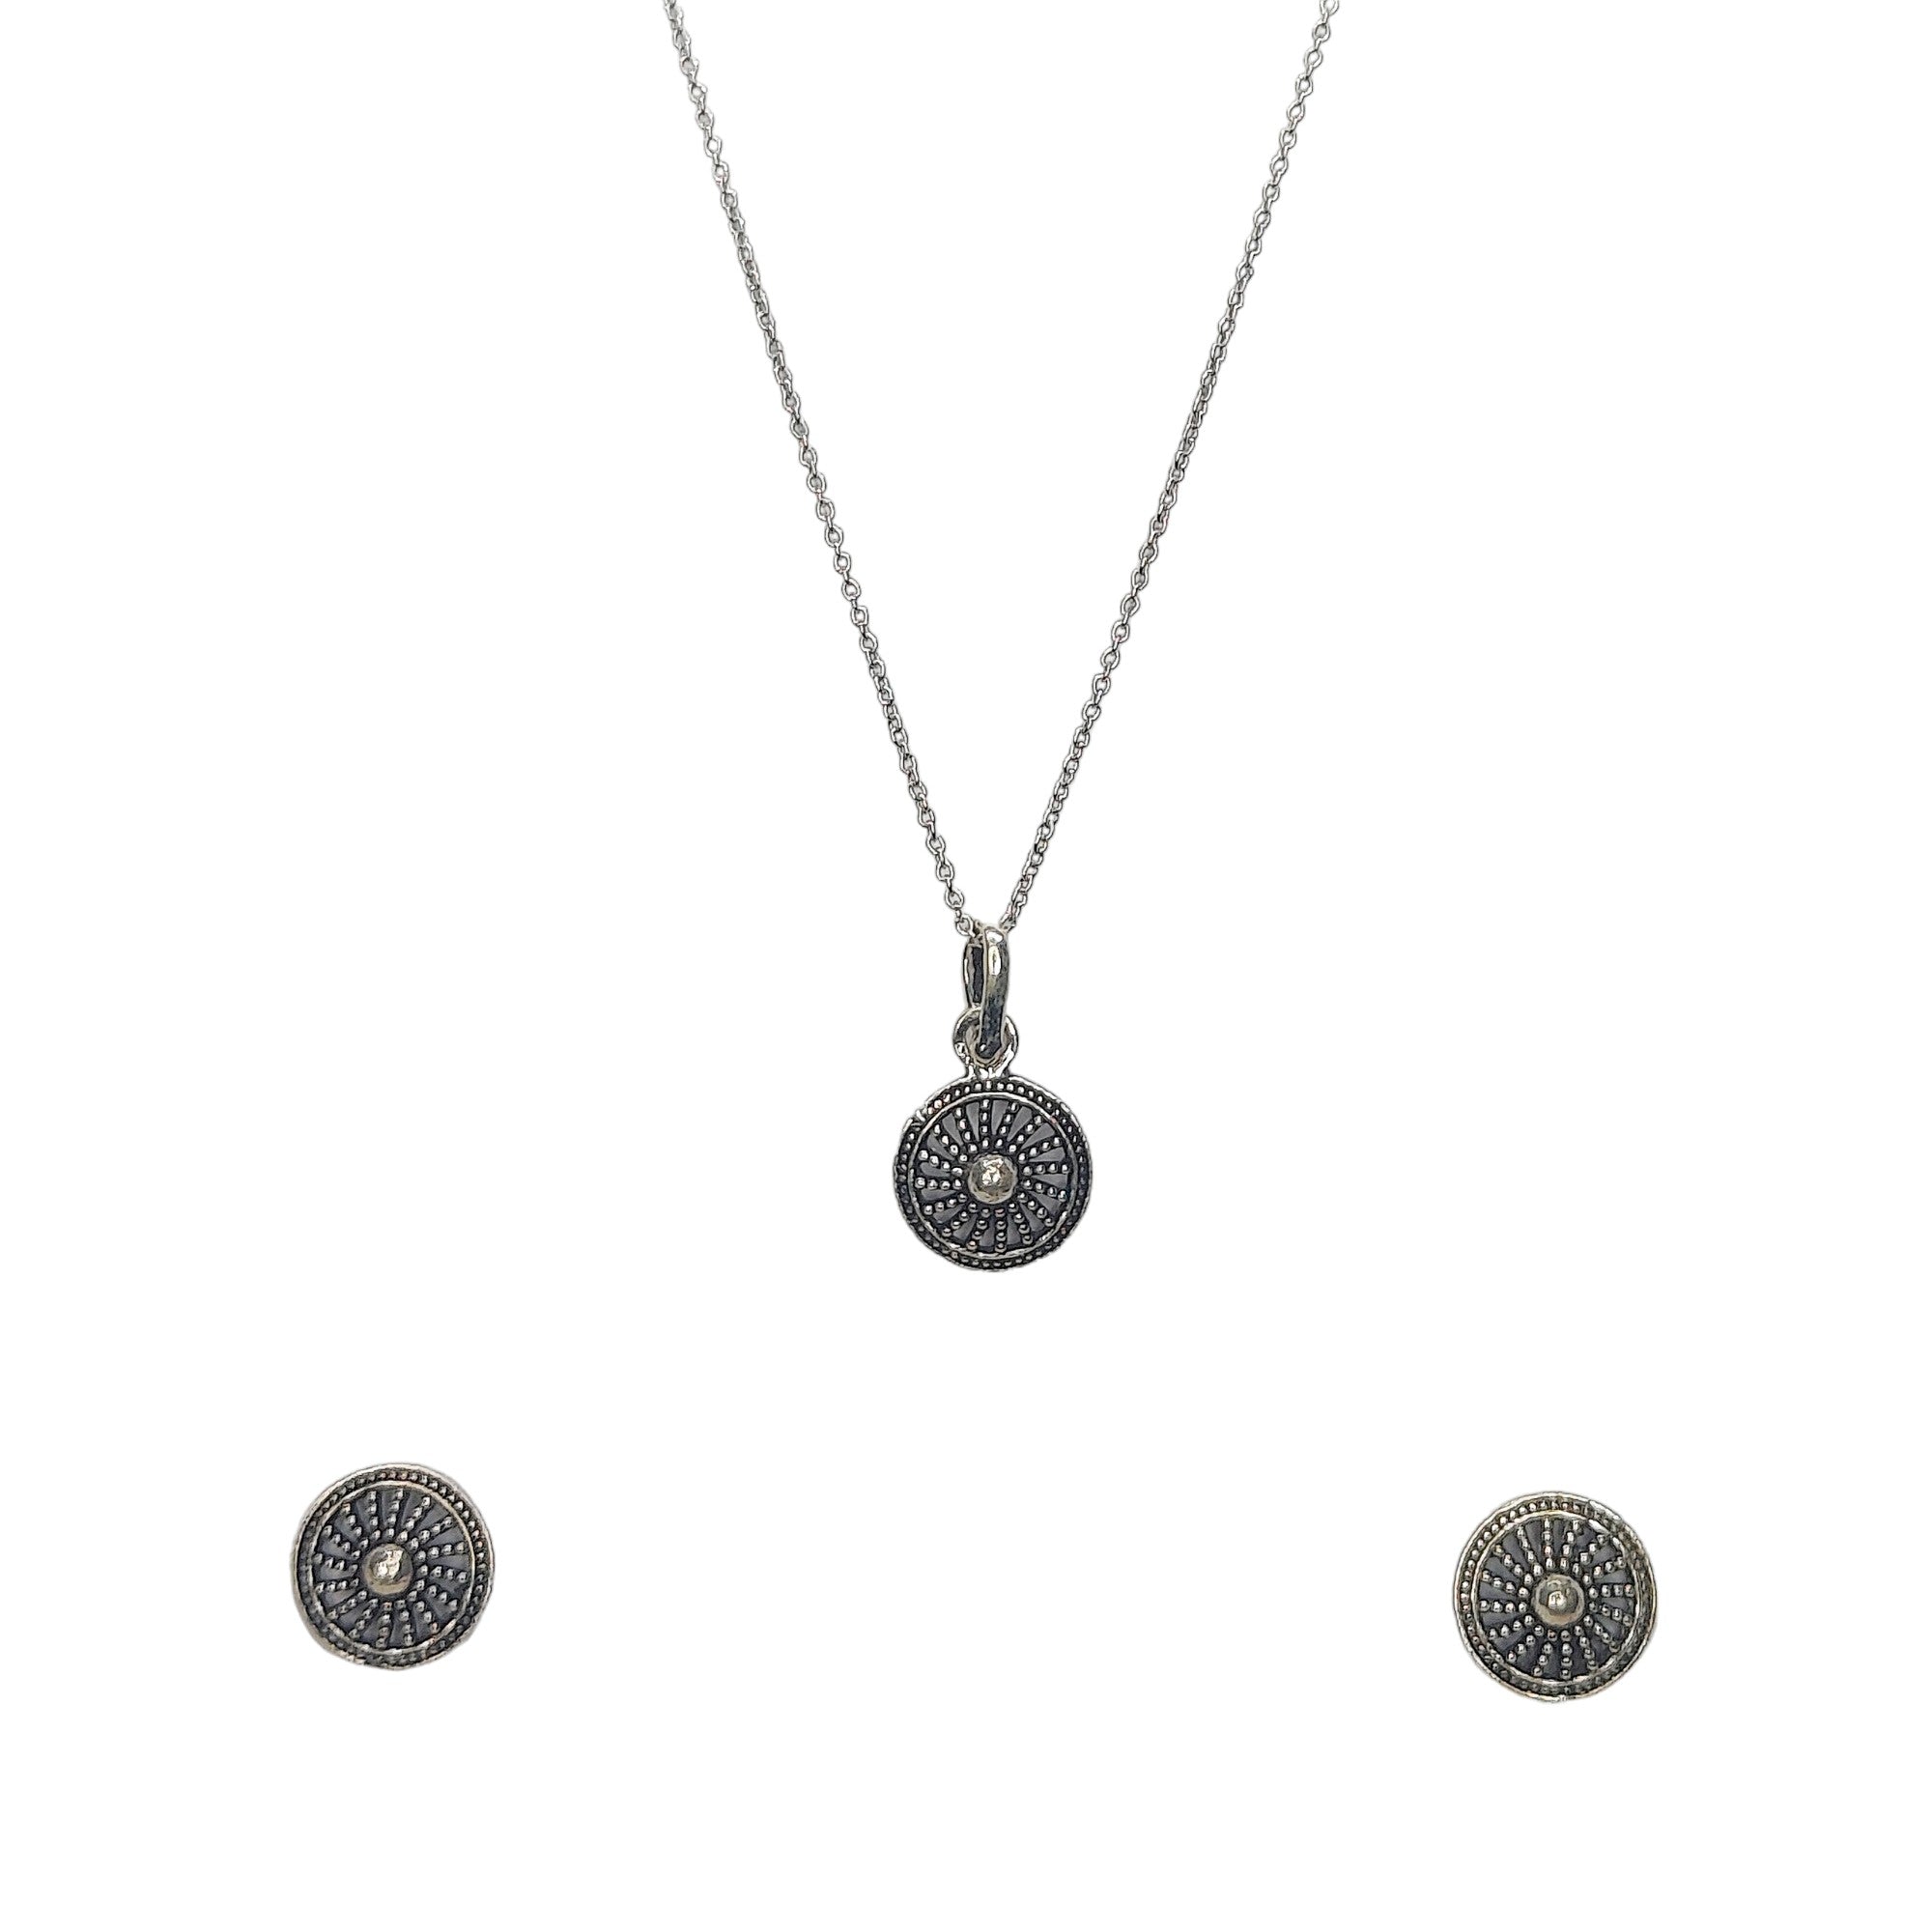 Oxidized Sterling Silver Wheel Pendent Set With Chain For Women - Rivansh